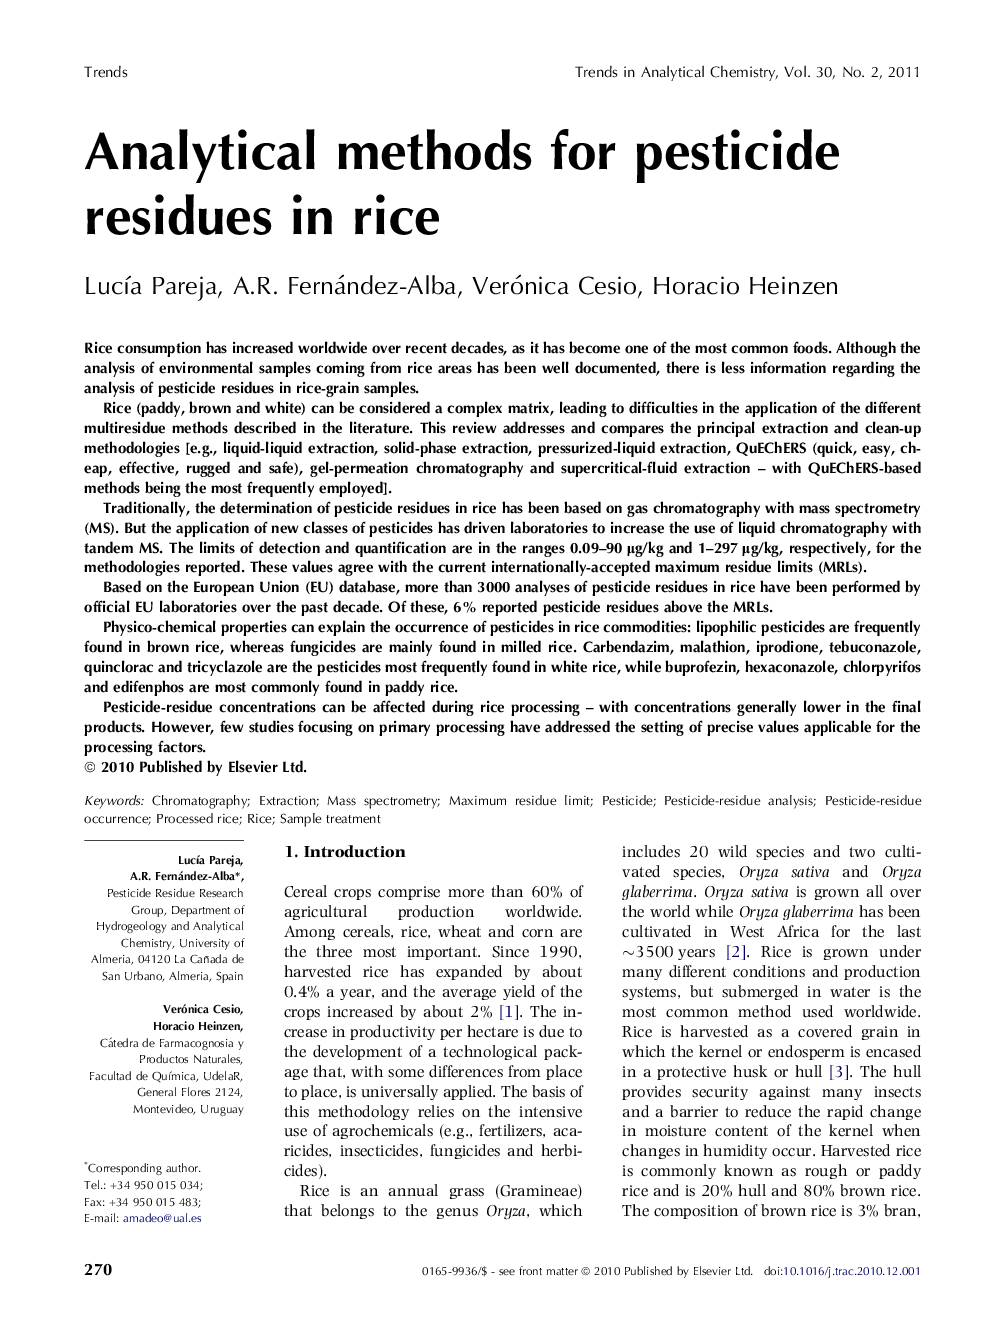 Analytical methods for pesticide residues in rice